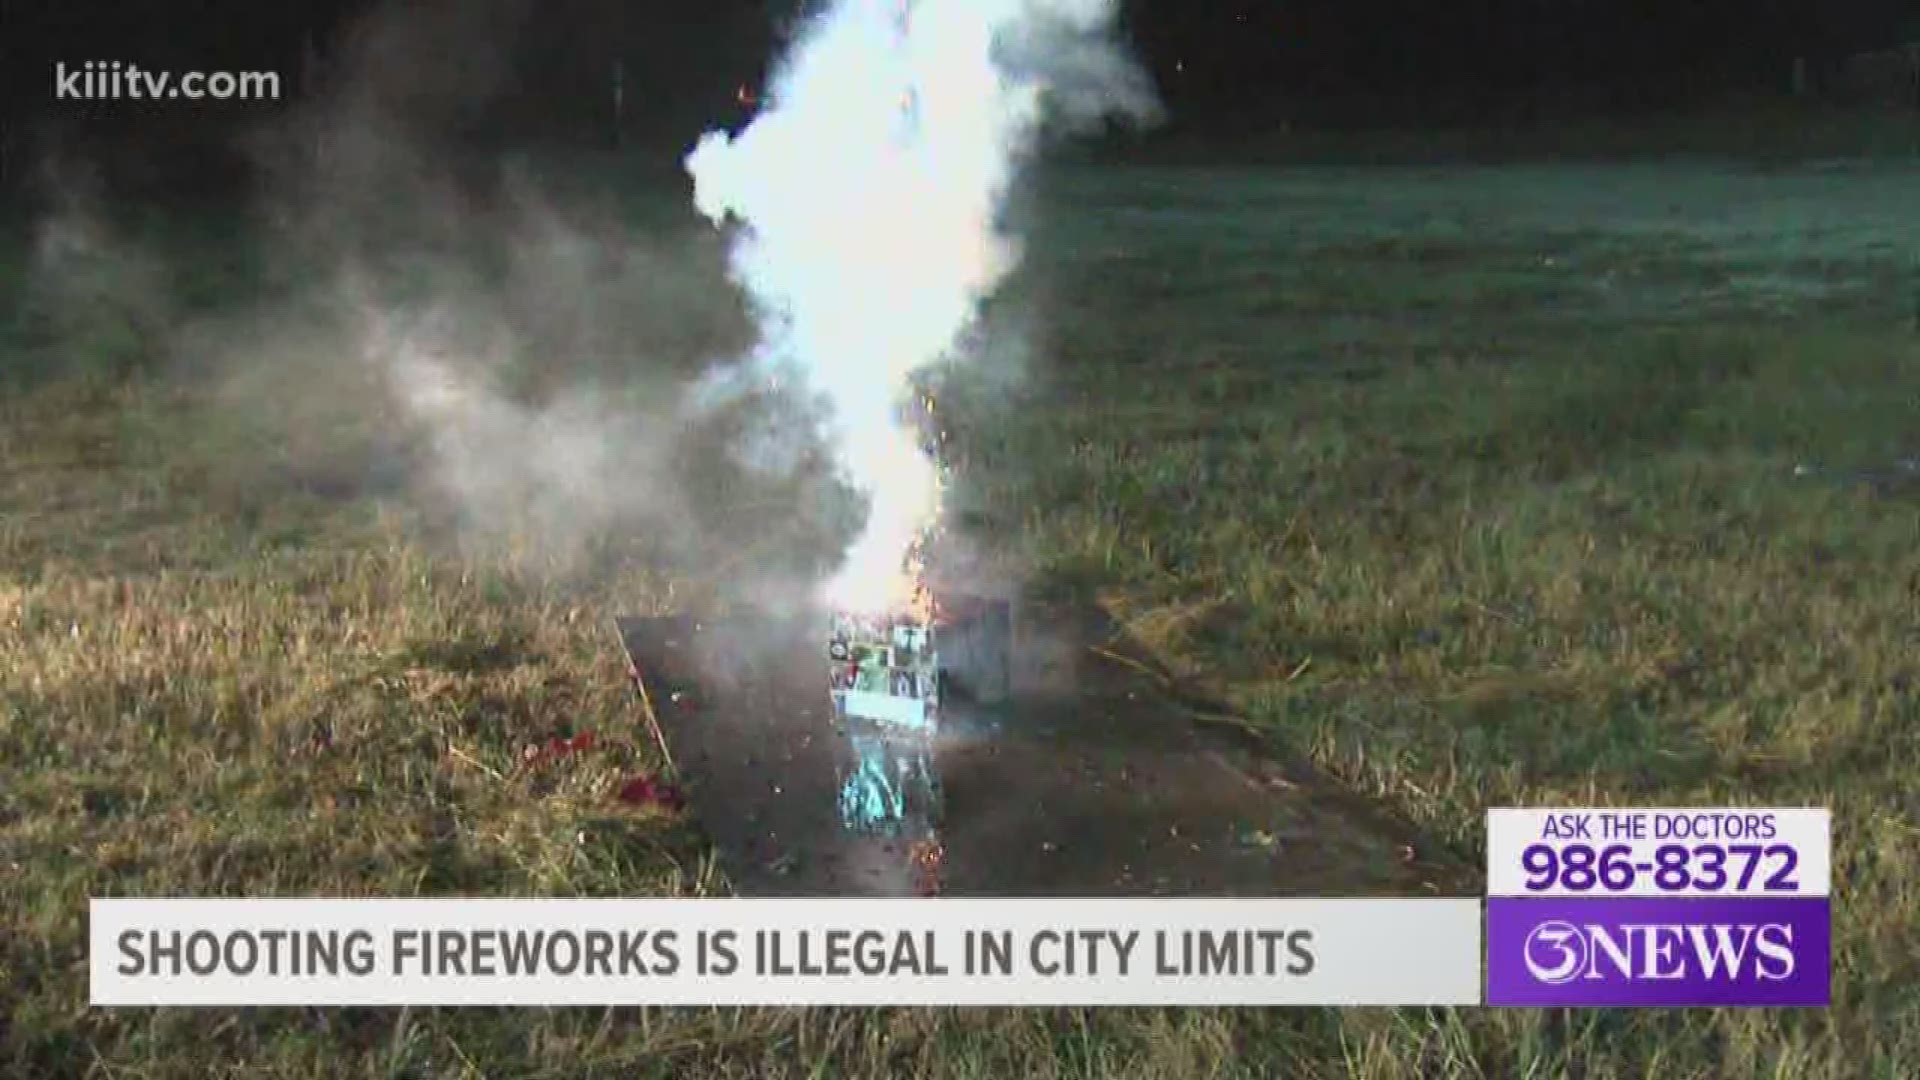 Fourth of July celebrations are less than 24 hours away but before you go and set off those fireworks, the Corpus Christi Fire Department wants to remind you that you cannot set them on in city limits.